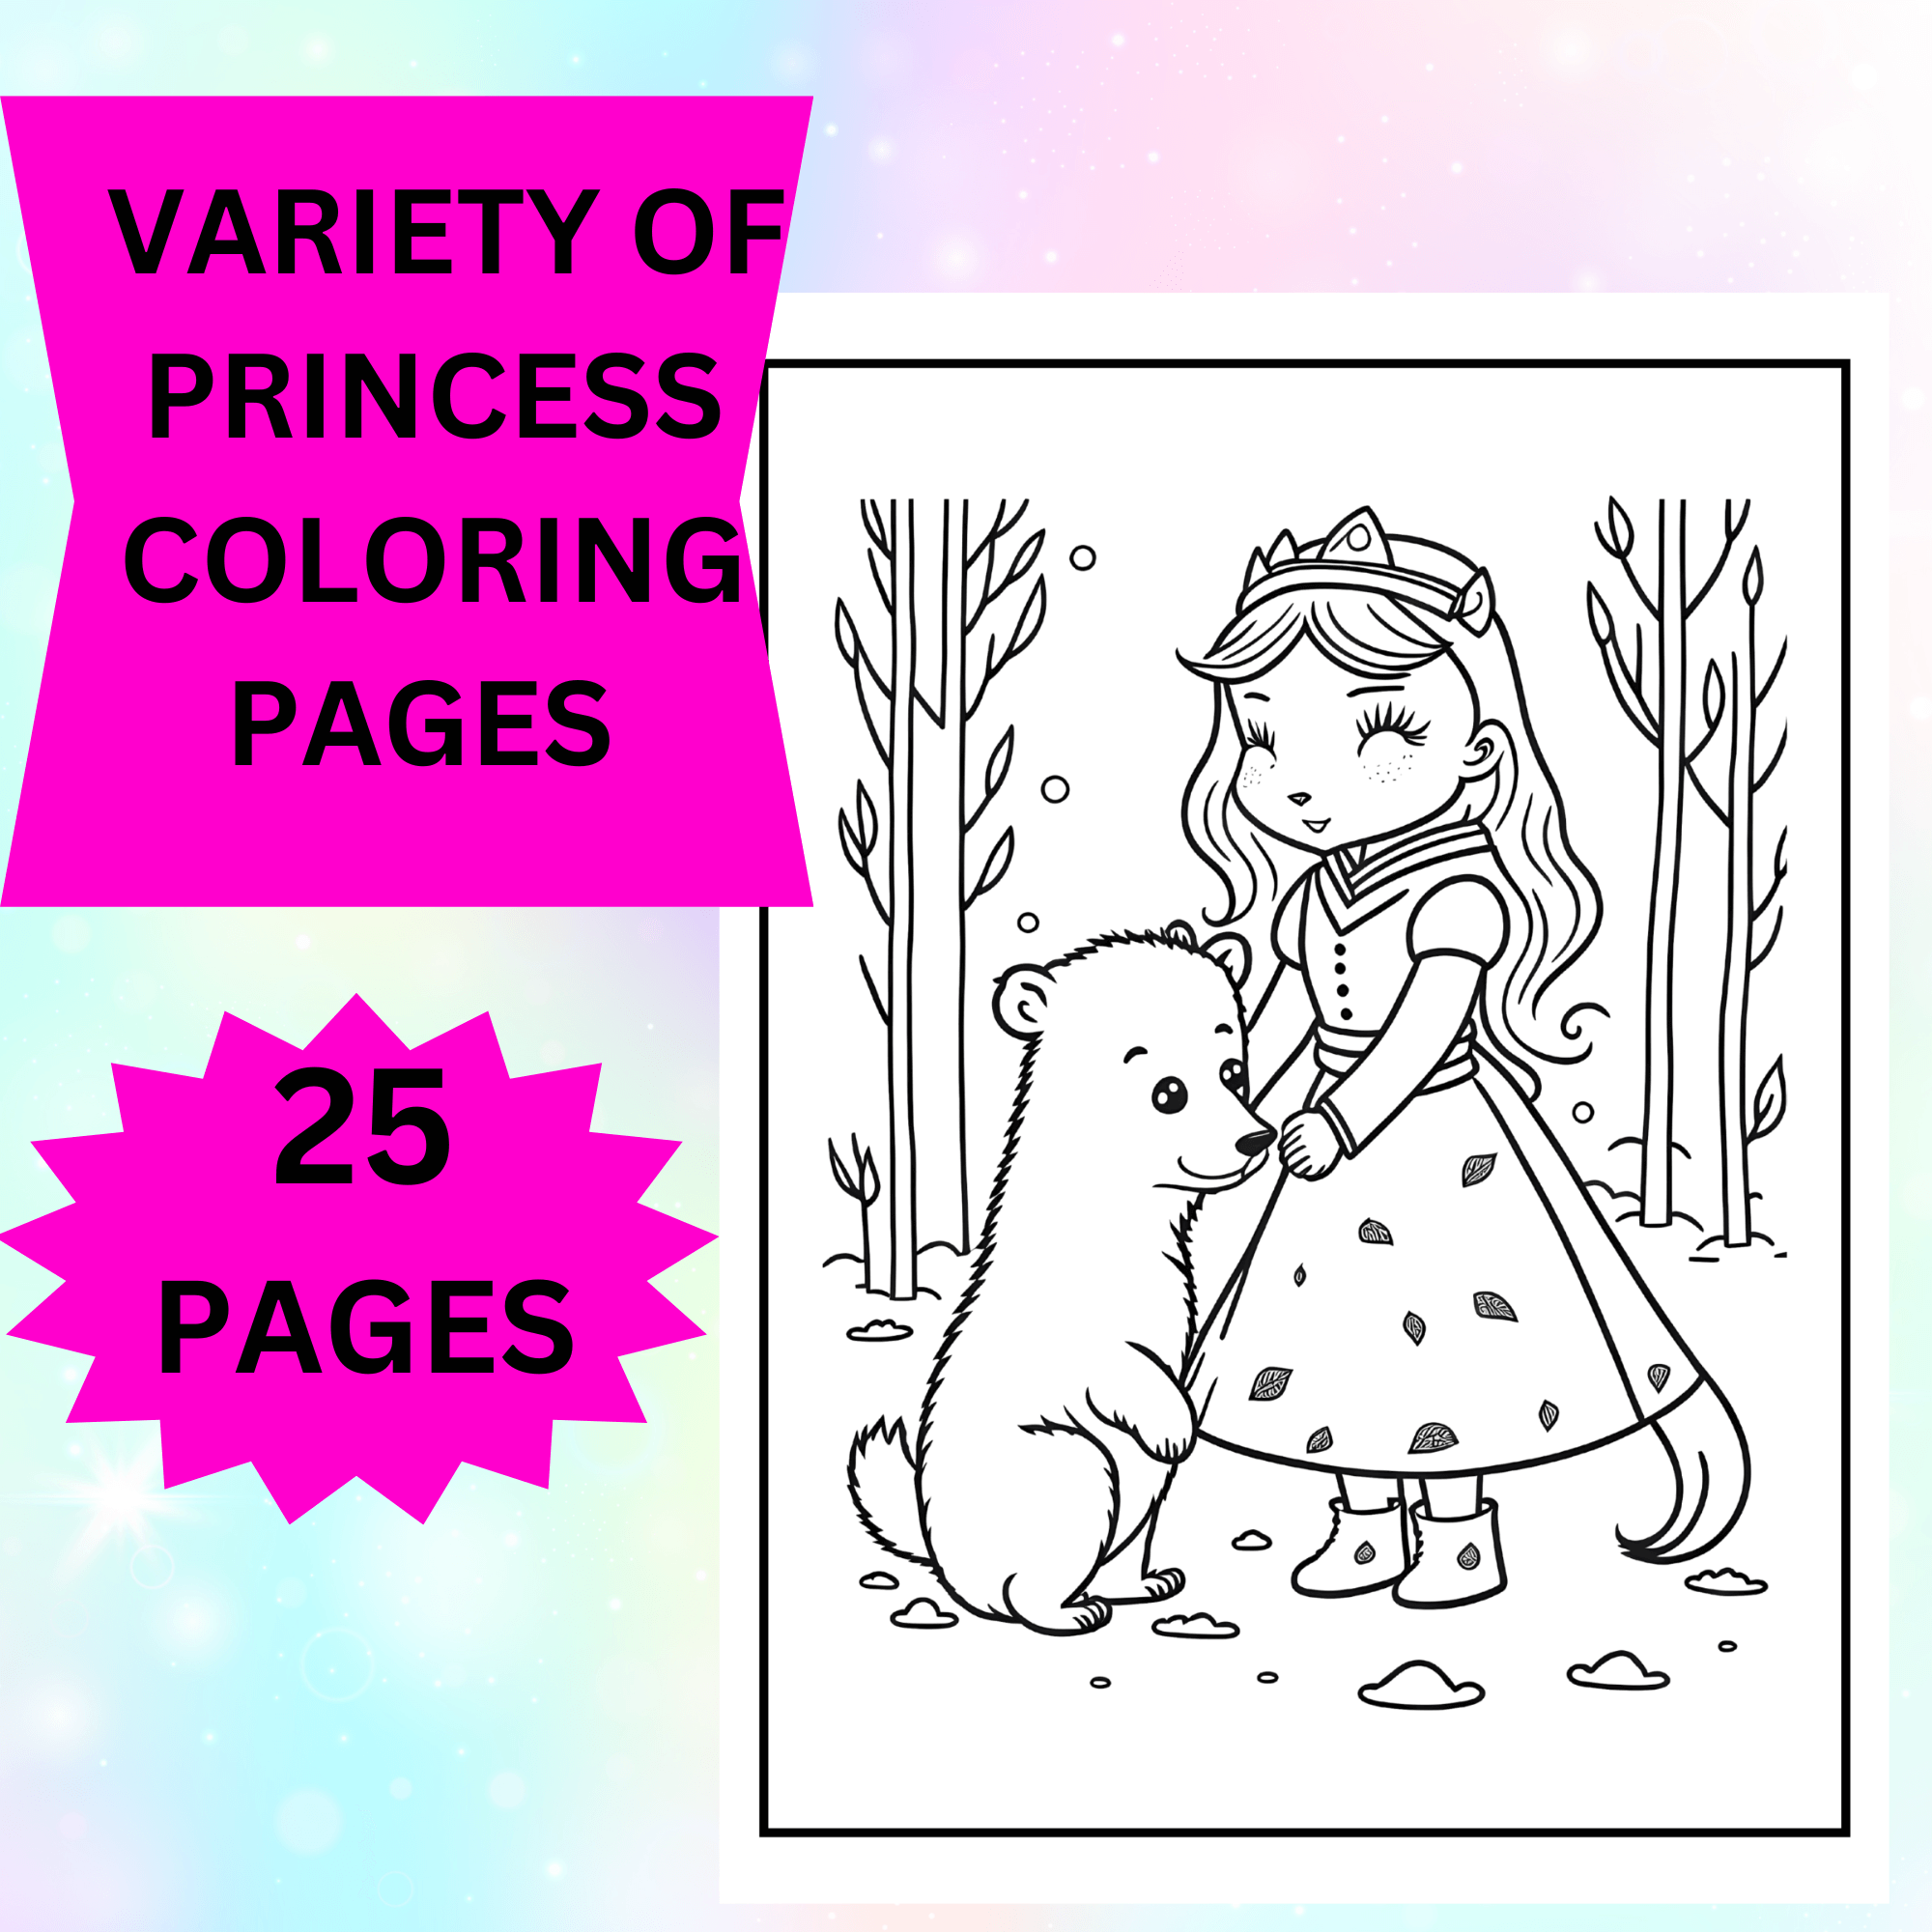 Beautiful and high quality variety princess coloring pages for kids made by teachers